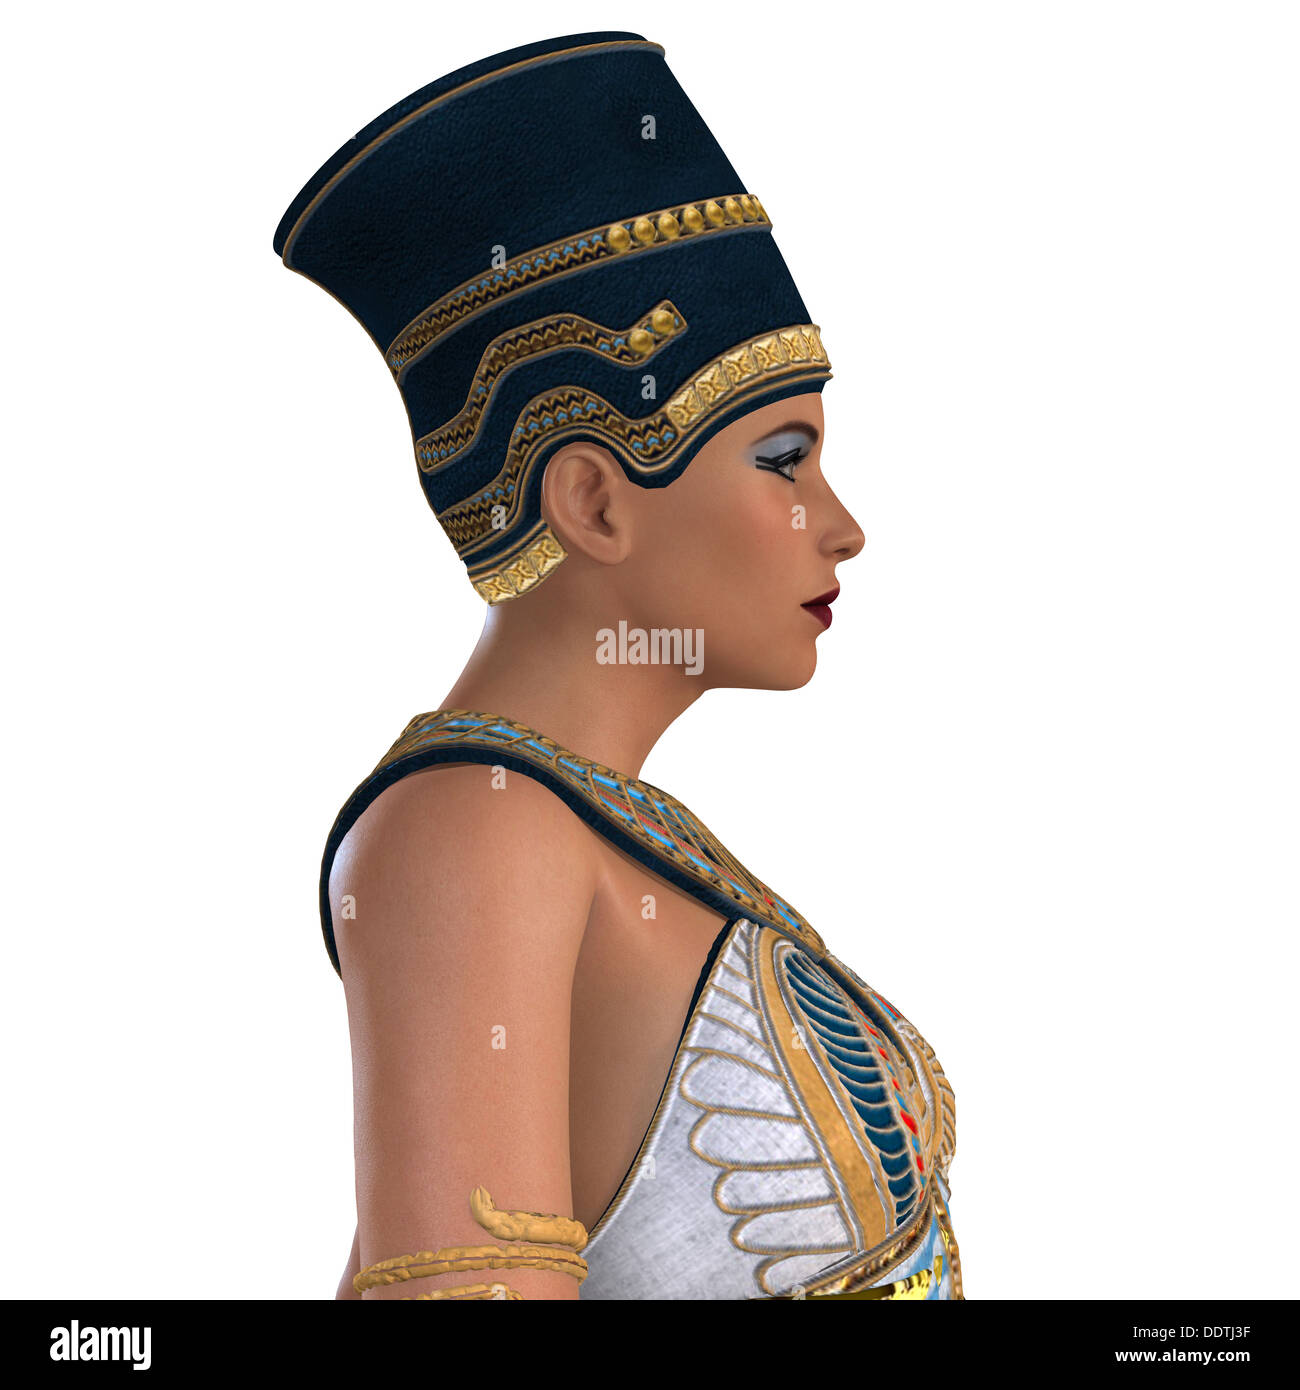 and Alamy hi-res stock images photography queen egyptian Ancient -